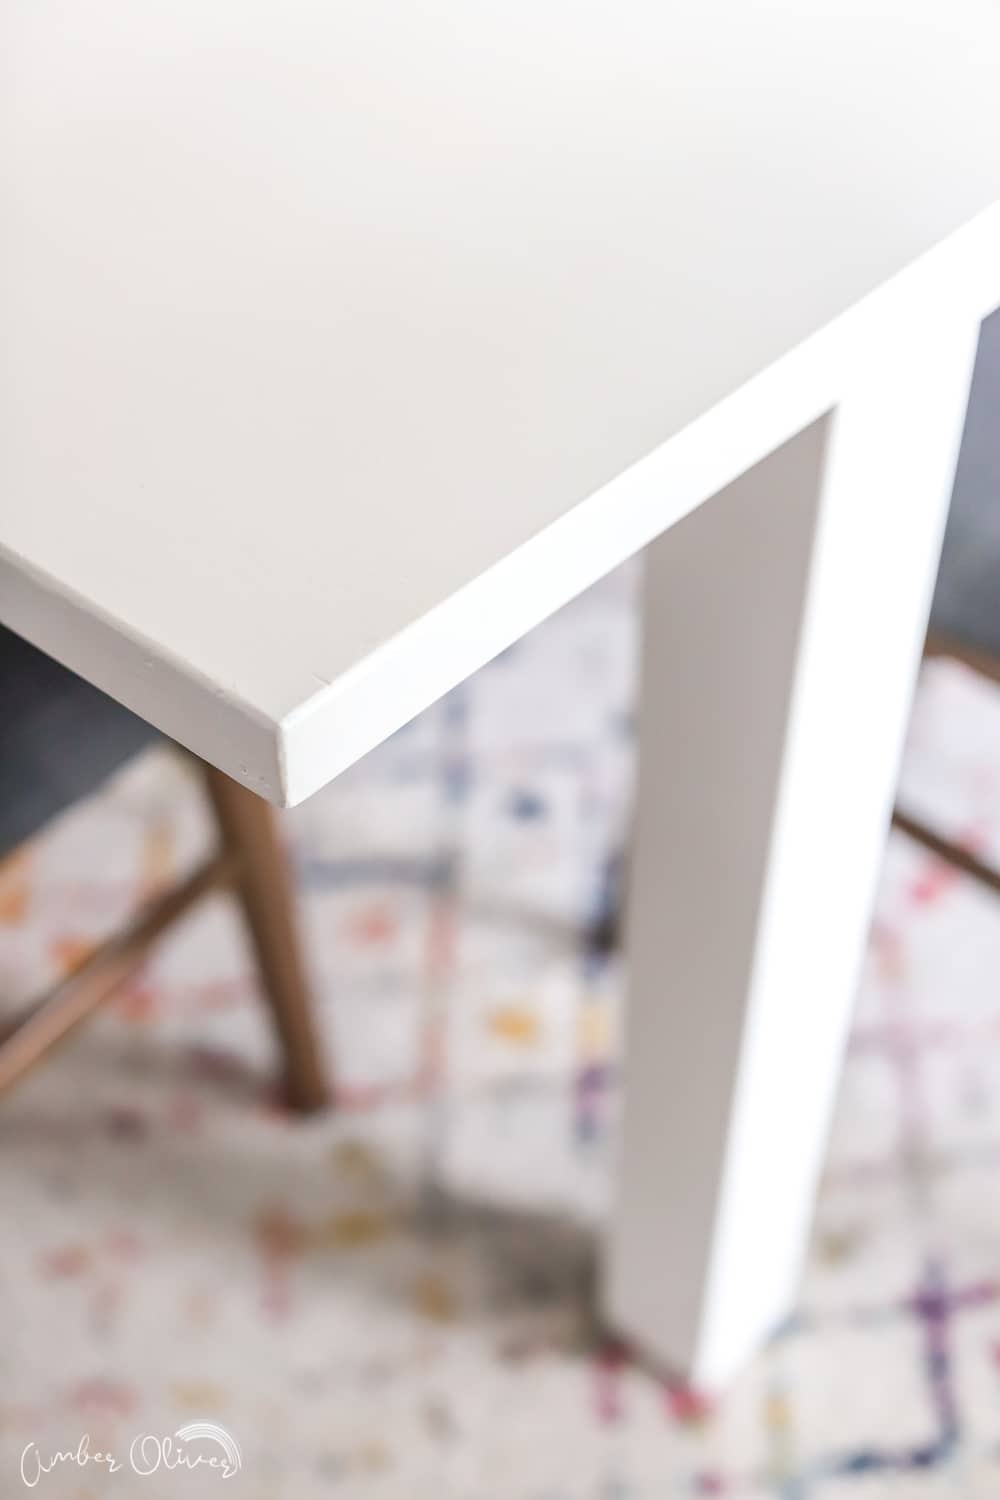 How to Make a DIY Paint Stick Table Top